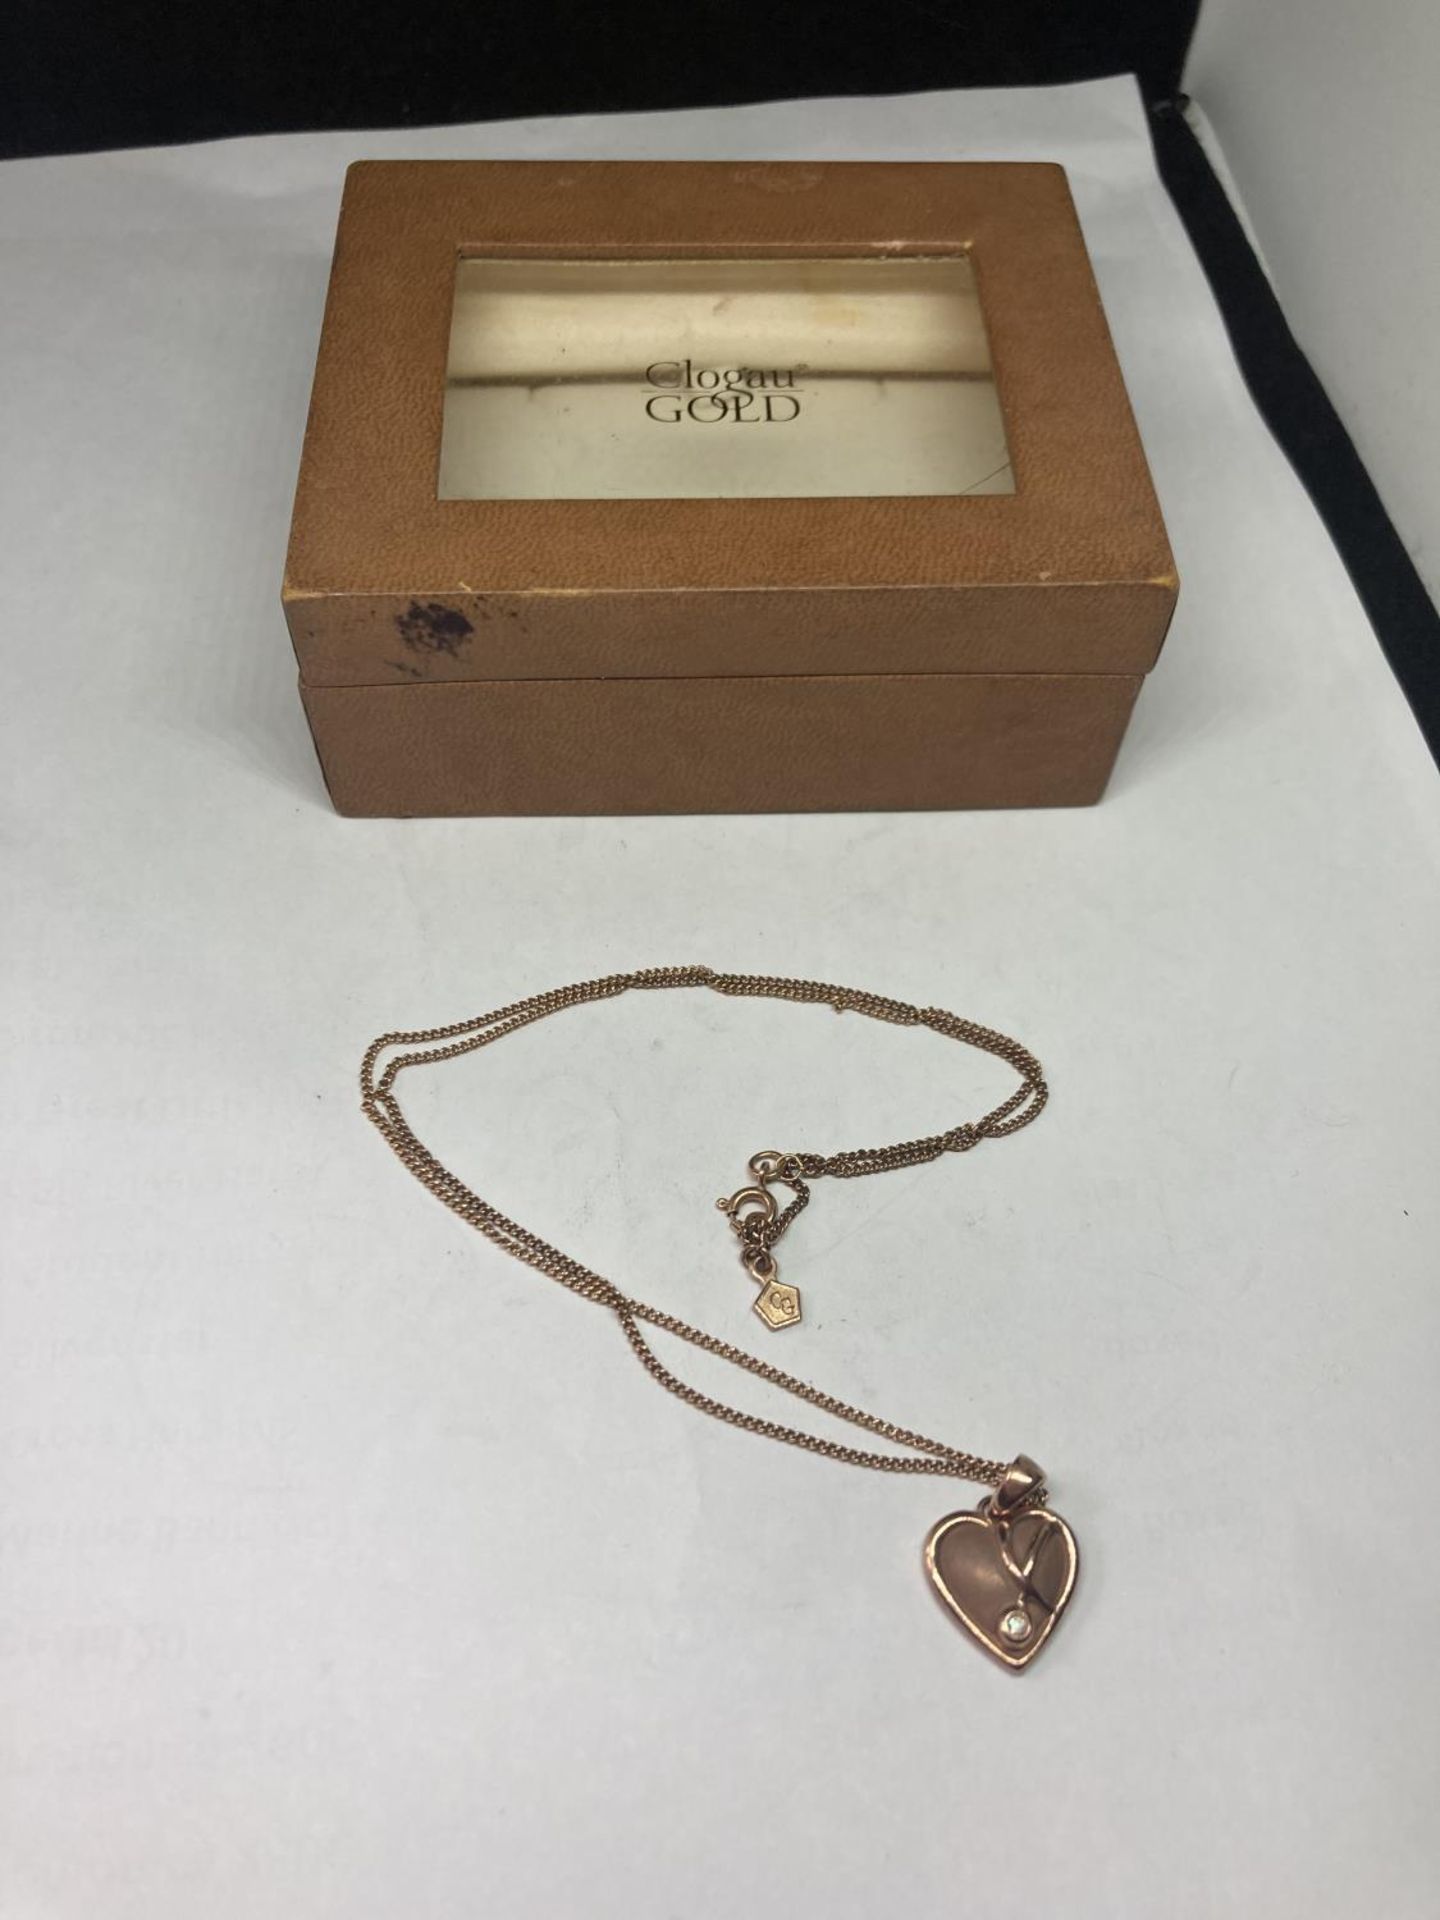 A CLOGAU 9 CARAT GOLD HEART PENDANT IN ORIGINAL PRESENTATION BOX WITH CERTIFICATE OF AUTHENTICITY